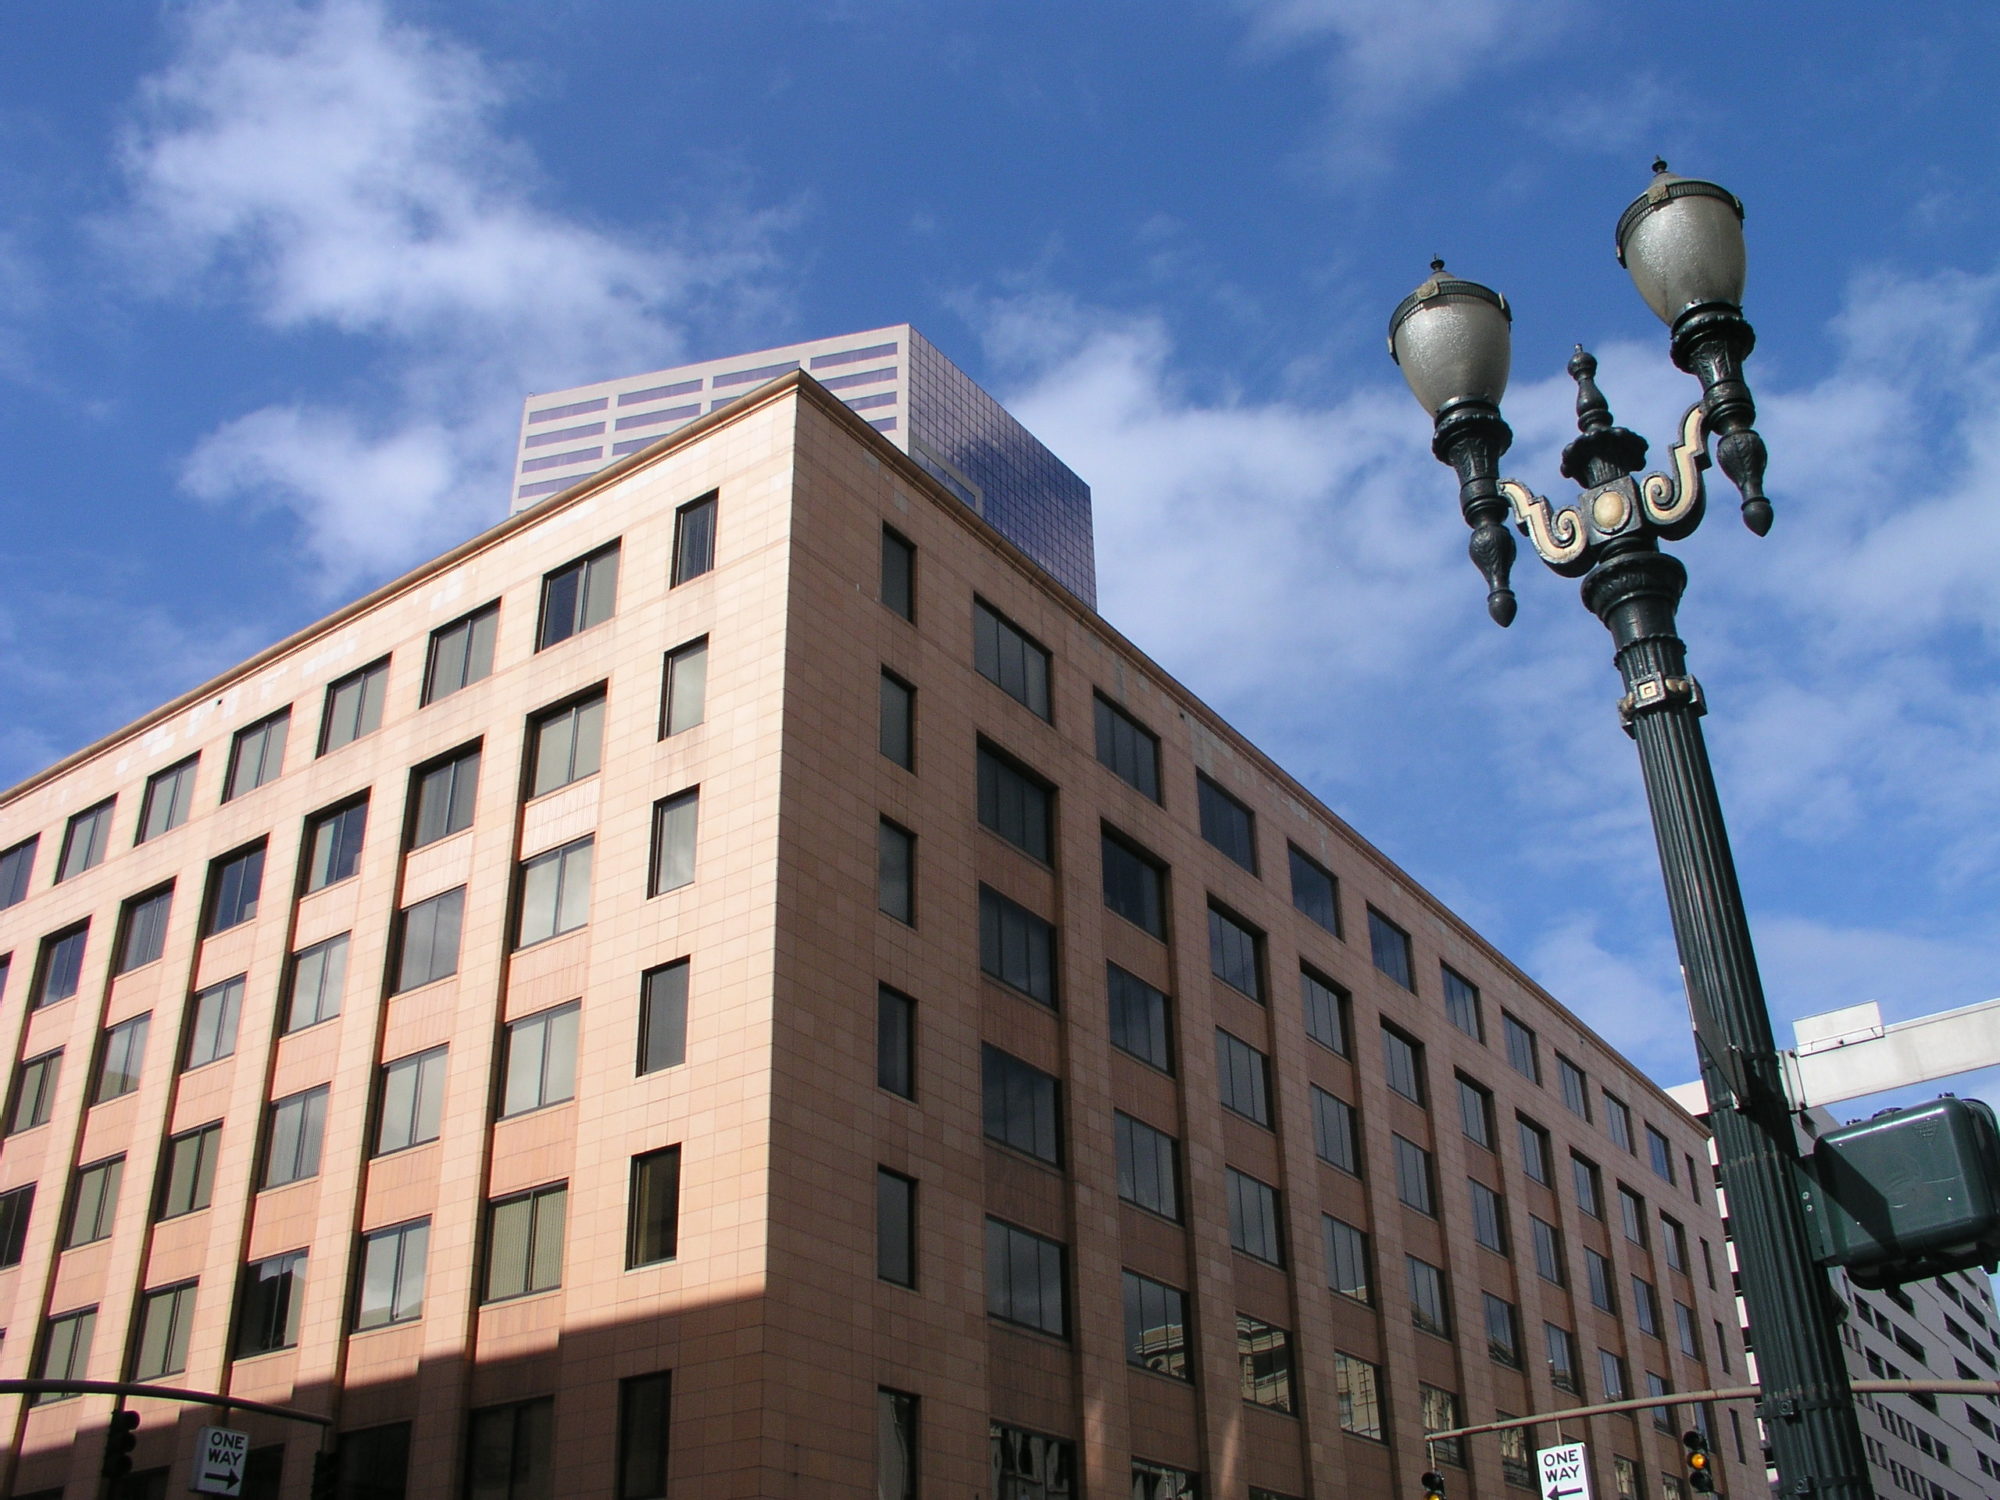 The Lincoln Building, a seven-story office building in downtown Portland, Ore. The US Bancorp Tower is visible behind it.